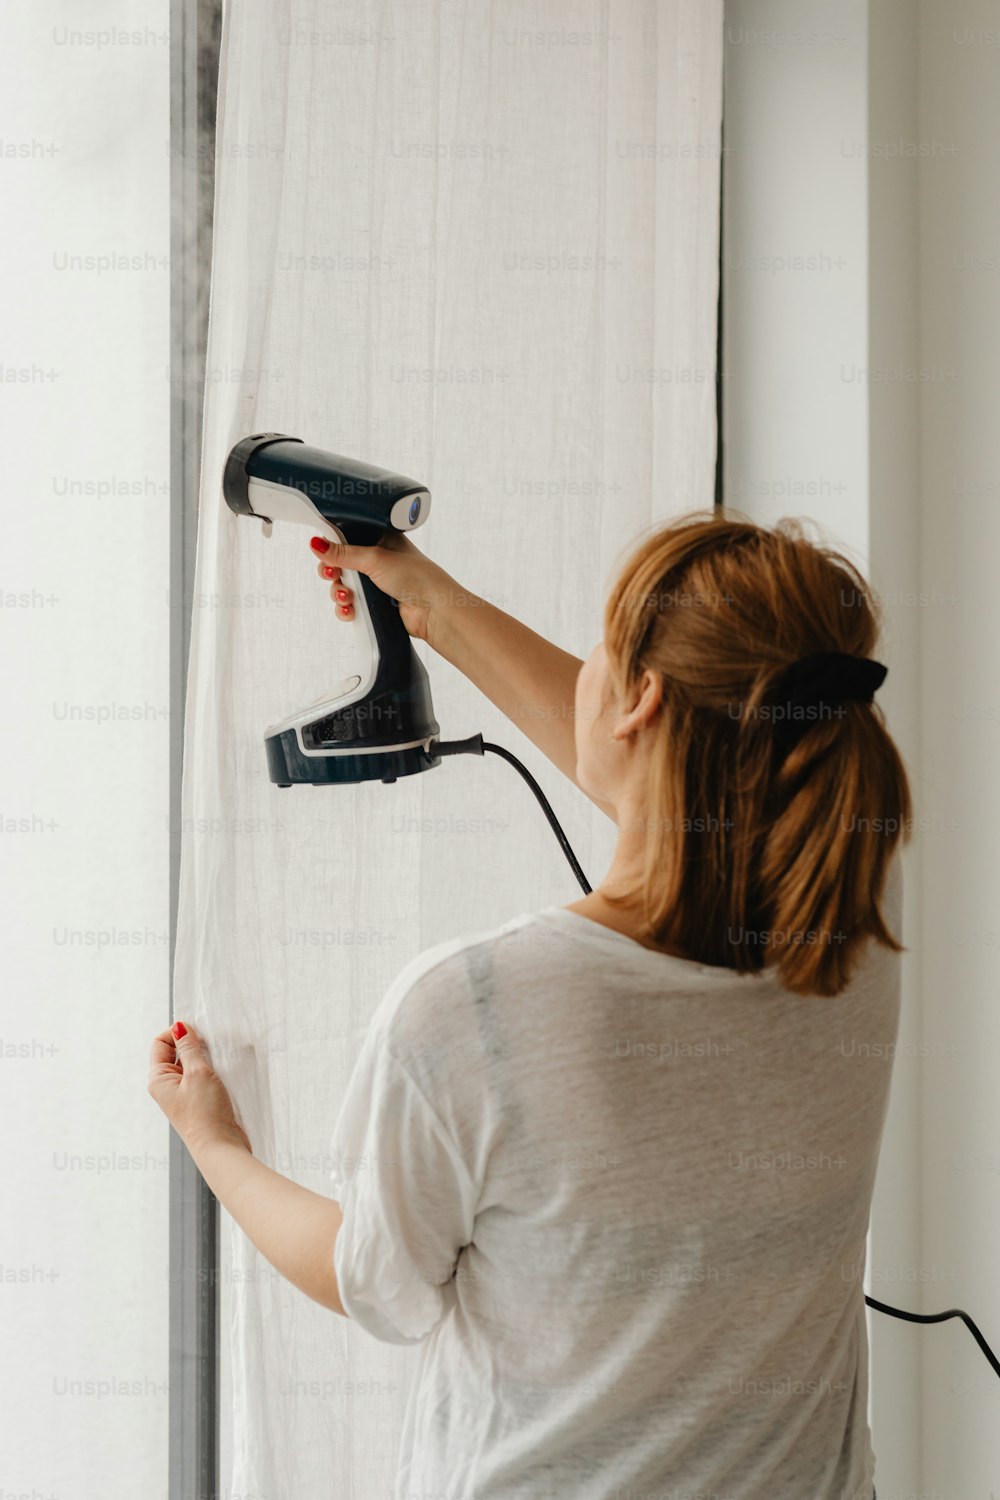 a woman using a hair dryer to dry her hair